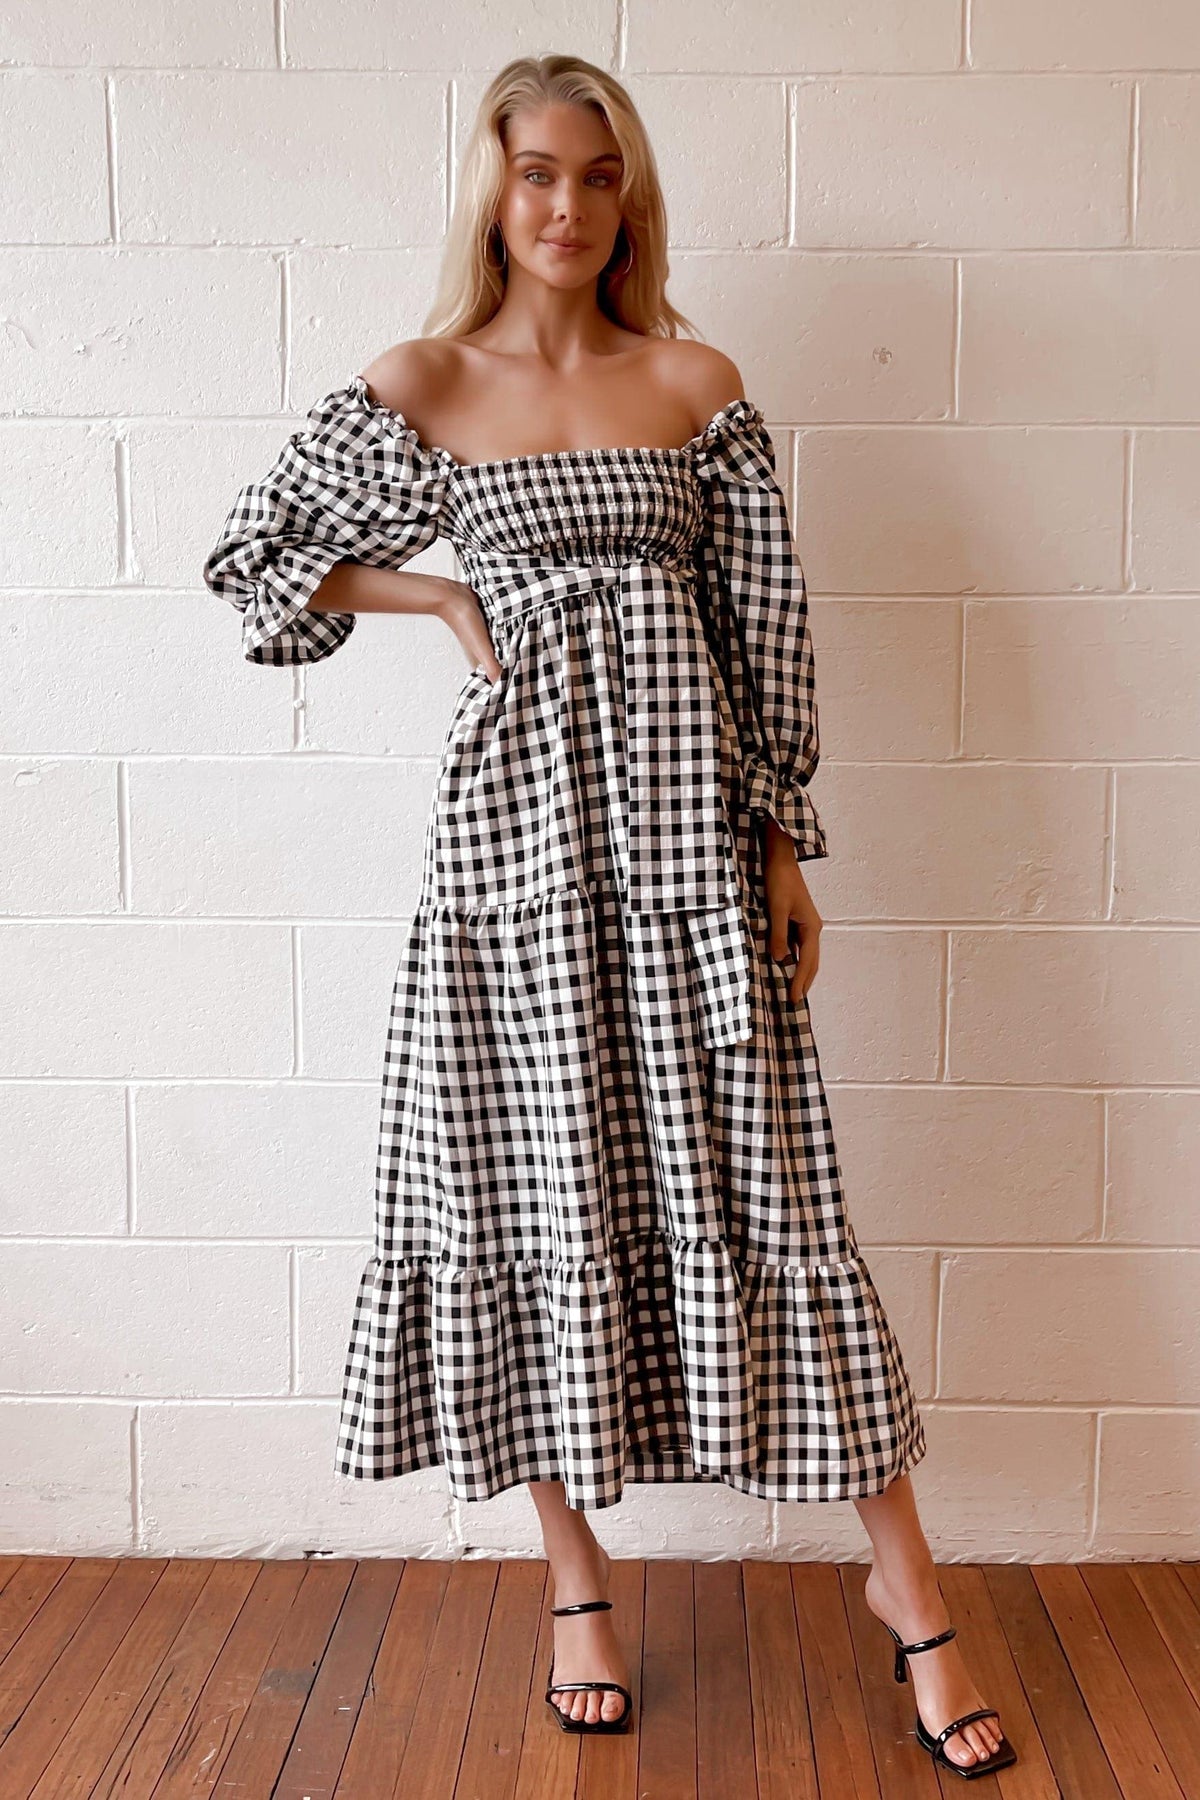 Cimberly Dress, BLACK, CHECKED, DRESS, DRESSES, ELASTANE, LONG SLEEVE, OFF SHOULDER, POLYESTER, PRINT, RUFFLE, SPO-DISABLED, VINTAGE, WAIST TIE, WHITE, Cimberly Dress only $71.00 @ MISHKAH ONLINE FASHION BOUTIQUE, Shop The Latest Women&#39;s Dresses - Our New Cimberly Dress is only $71.00, @ MISHKAH ONLINE FASHION BOUTIQUE-MISHKAH